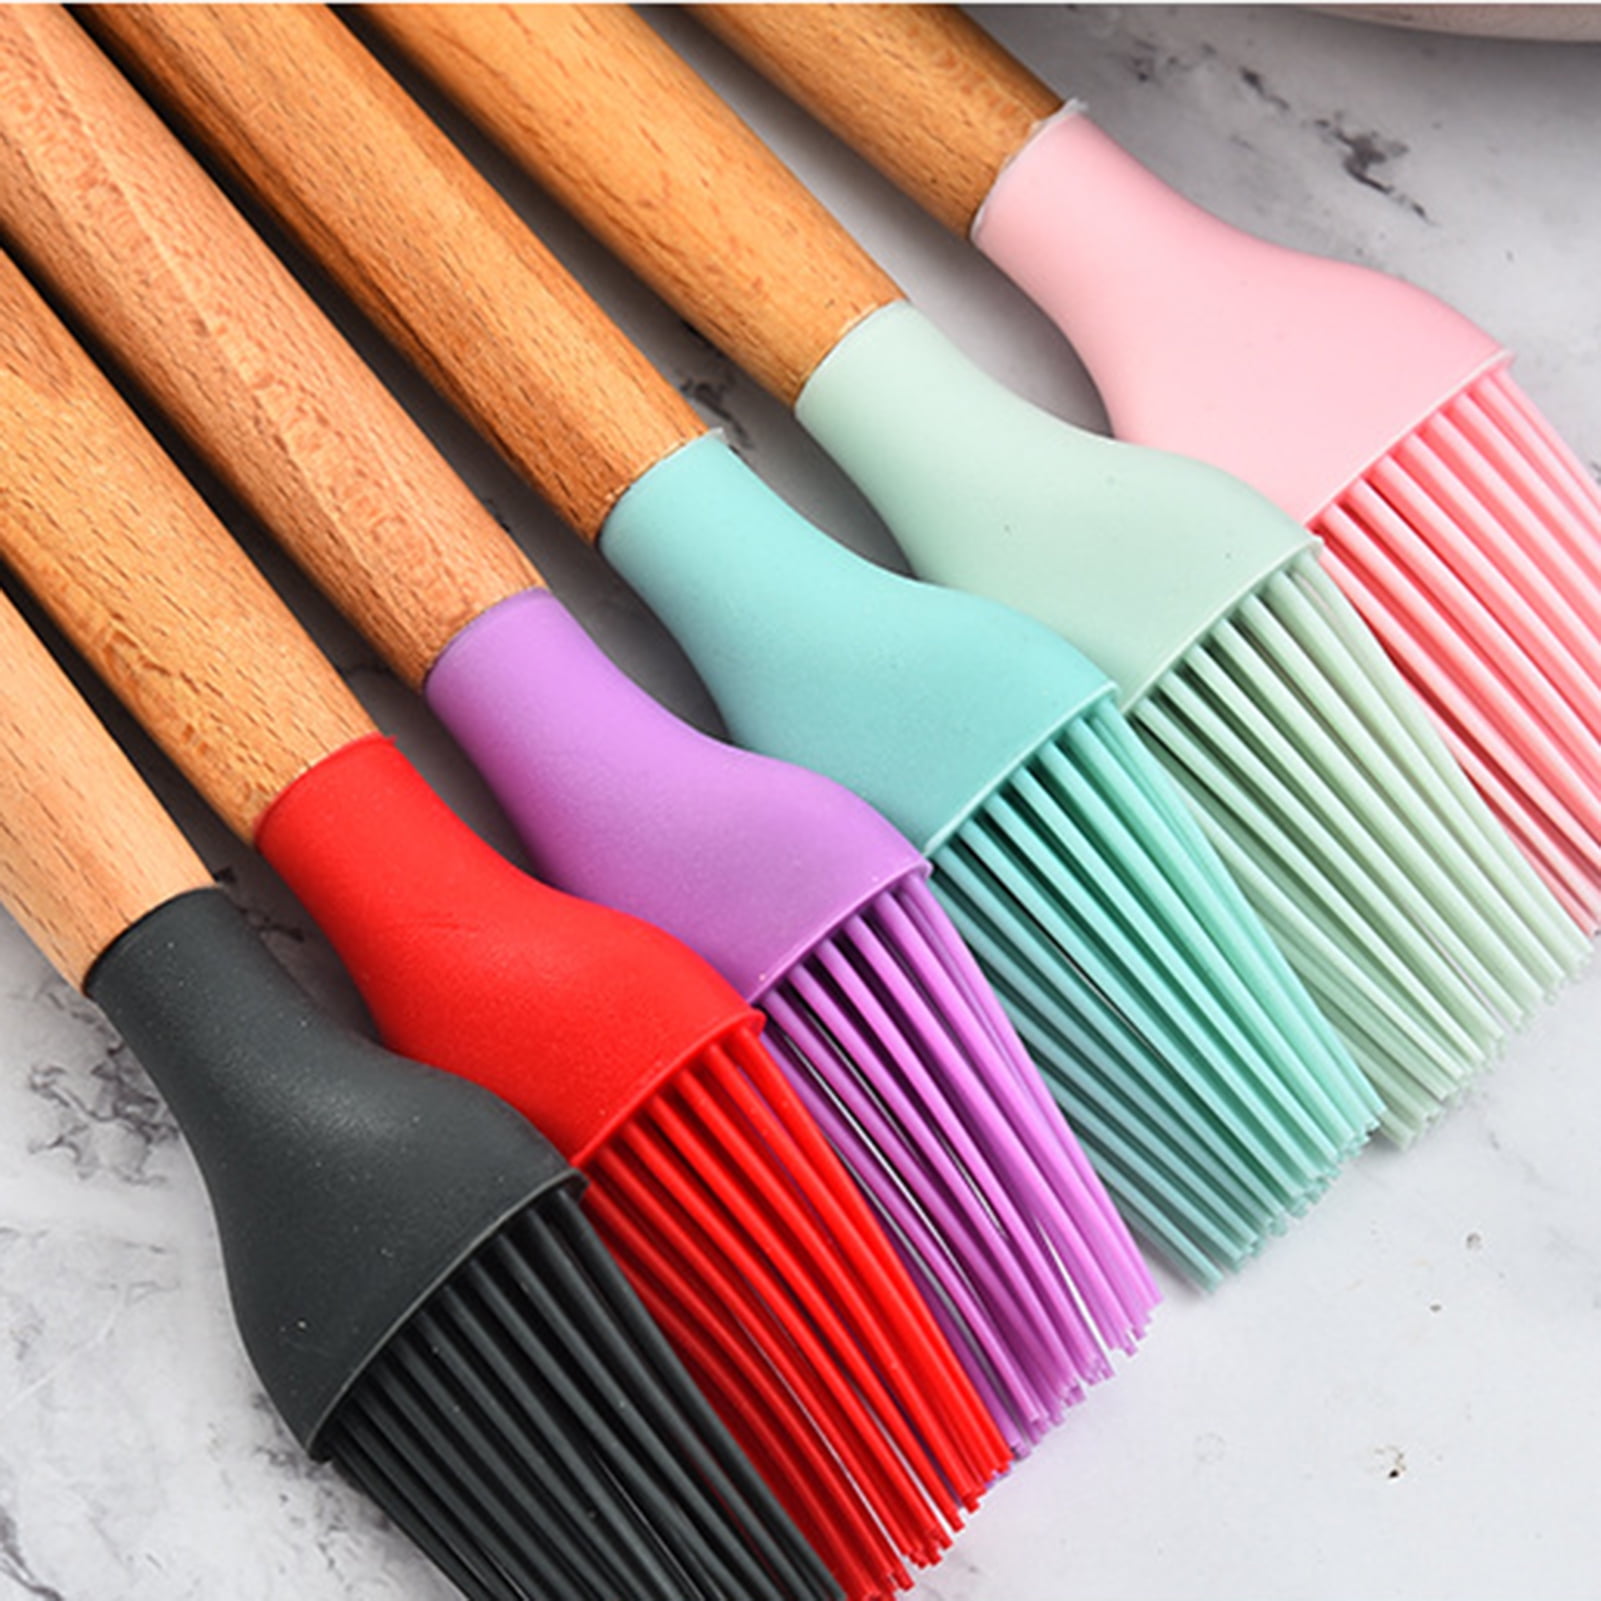 Silicone Basting To Brush To Brush Cooking To Brush Baking BBQ Pastry Sauce  Butter And Oil To Brush Turkey Baster Use For Grilling Desserts HH21 111  From Seals168, $0.28